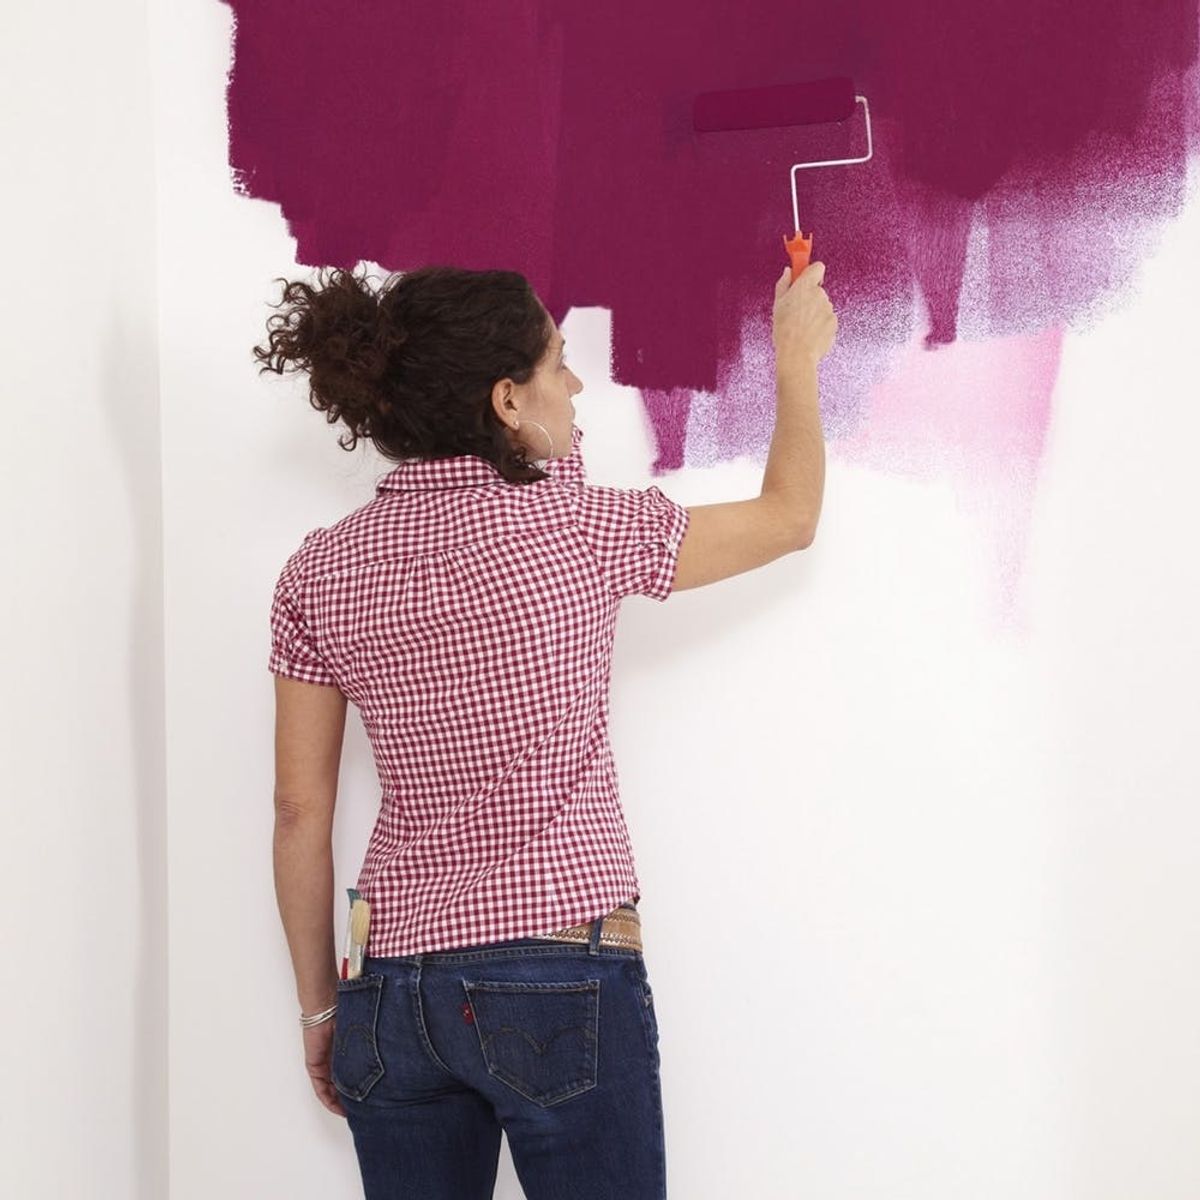 Paintable Temporary Wallpaper Is a Thing and Renters Everywhere Are Rejoicing